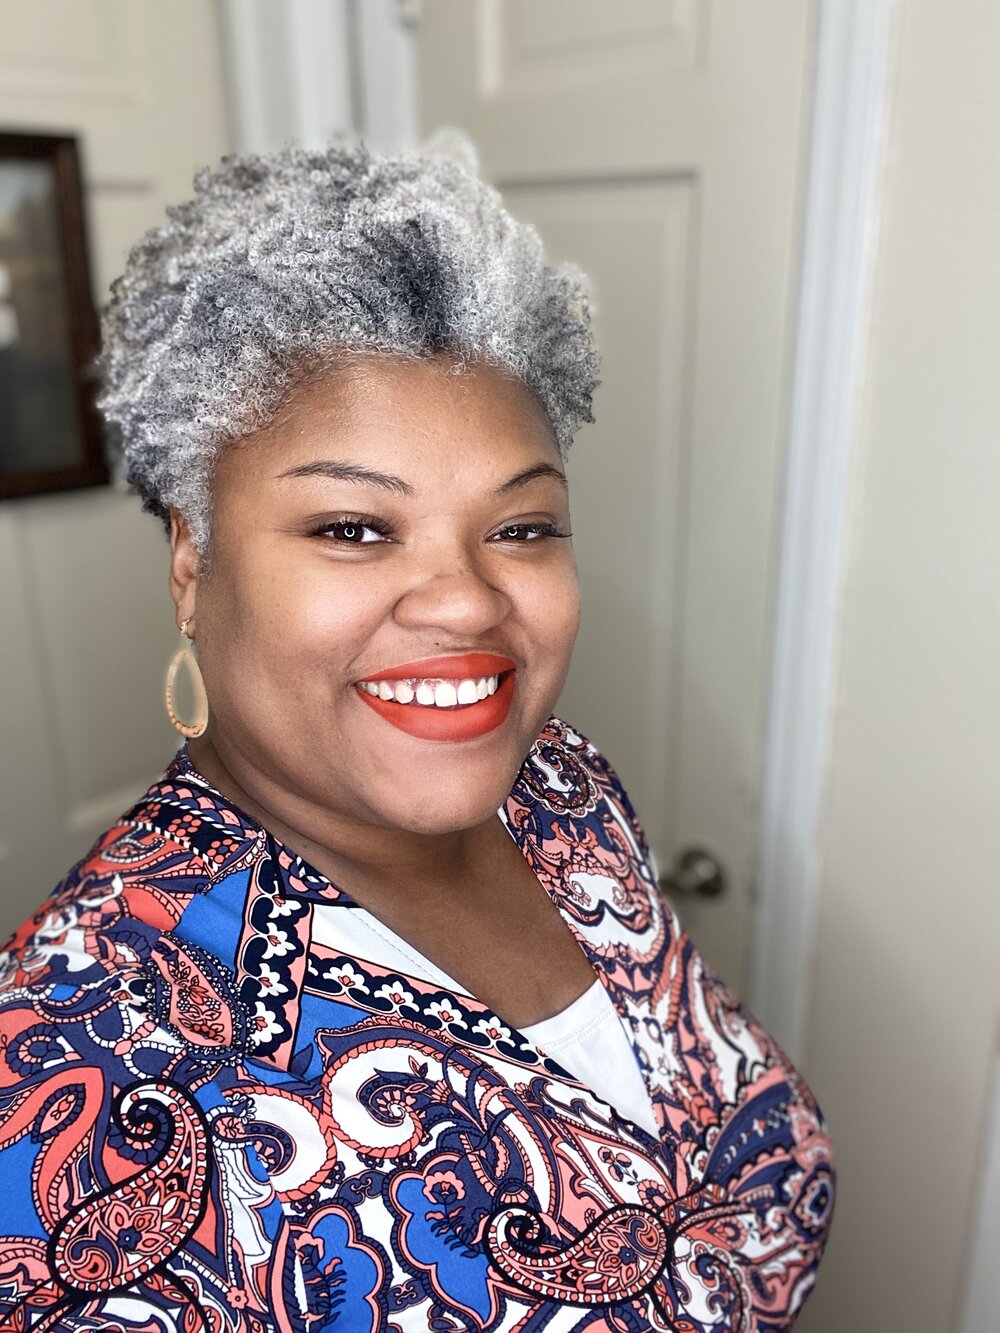 I TRIED A BEER RINSE AND IT BRIGHTENED MY GRAY HAIR — NATURALLY GRAYSFUL 🦋